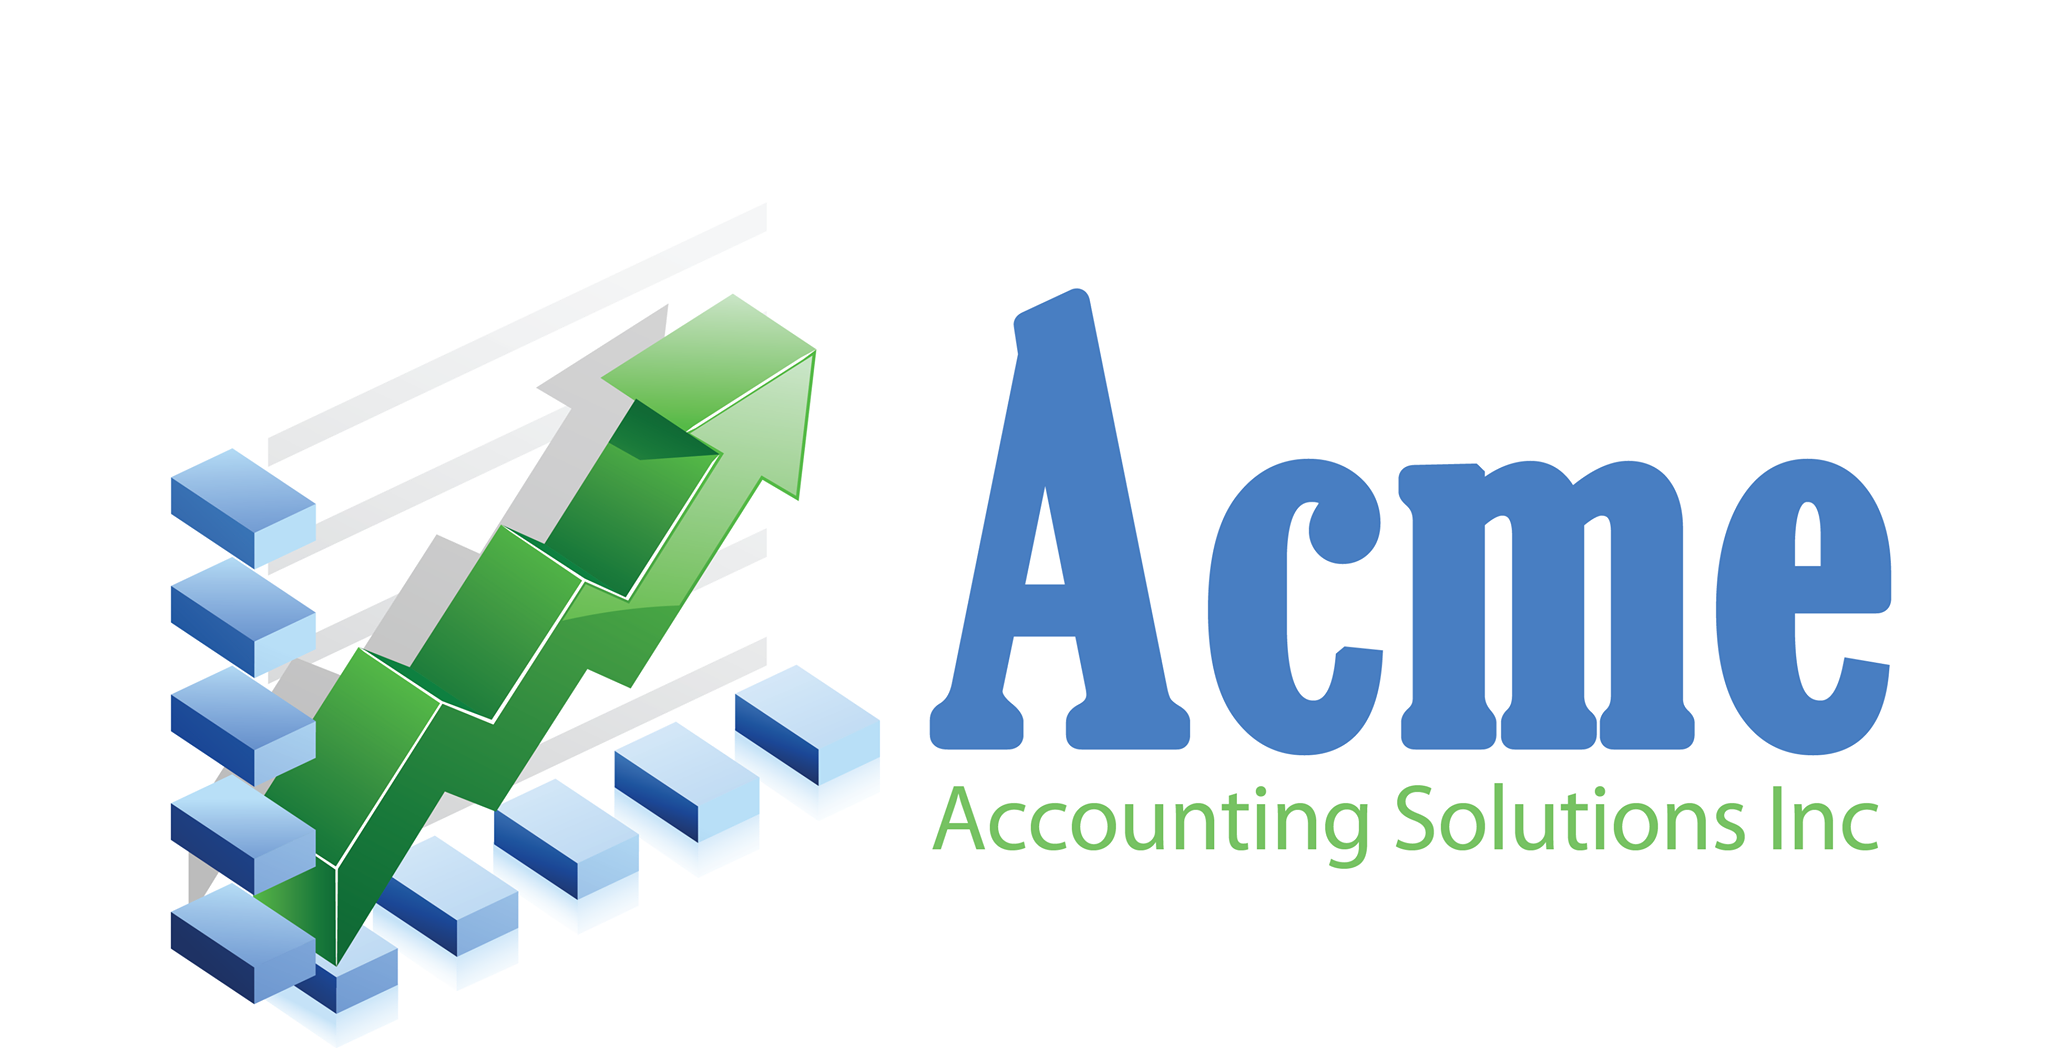 Acme Accounting Services, Inc. 1250 N Page St, Marengo Illinois 60152